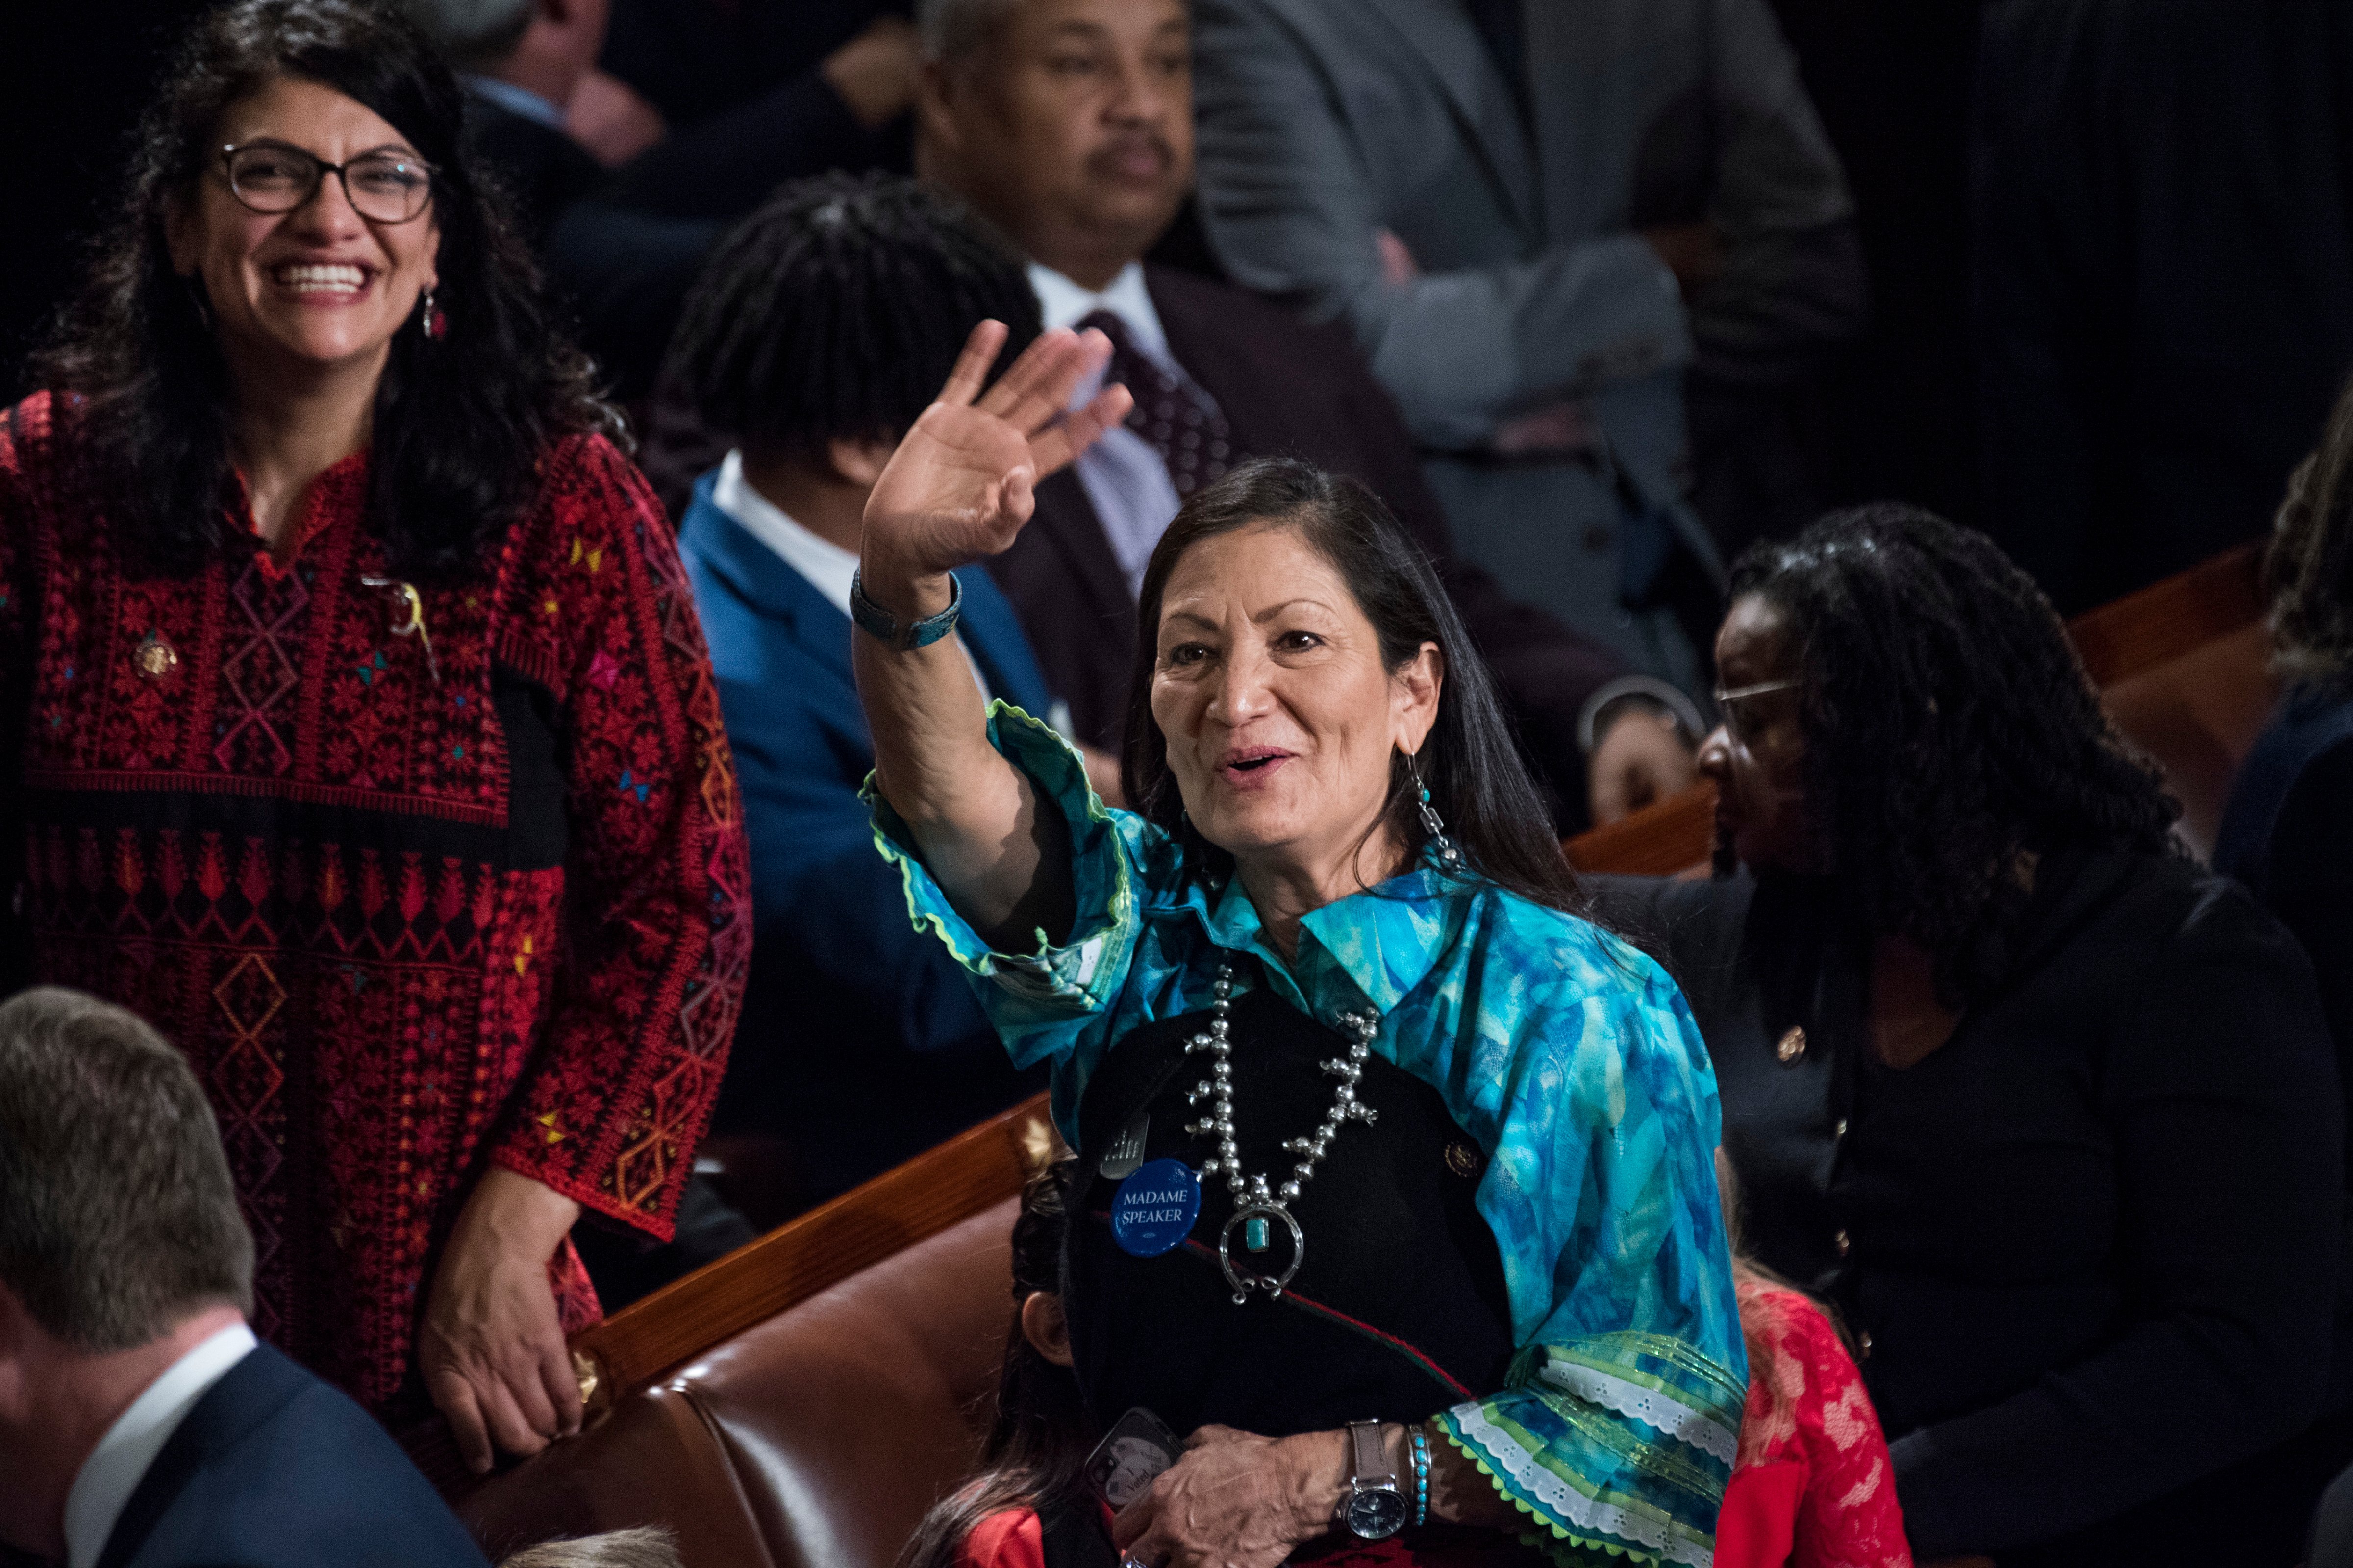 Reps. Deb Haaland, D-N.M., right, and Rashida Tlaib, D-N.M., left, are seen in the Capitol's House chamber. (Tom Williams—CQ-Roll Call/Getty Images)